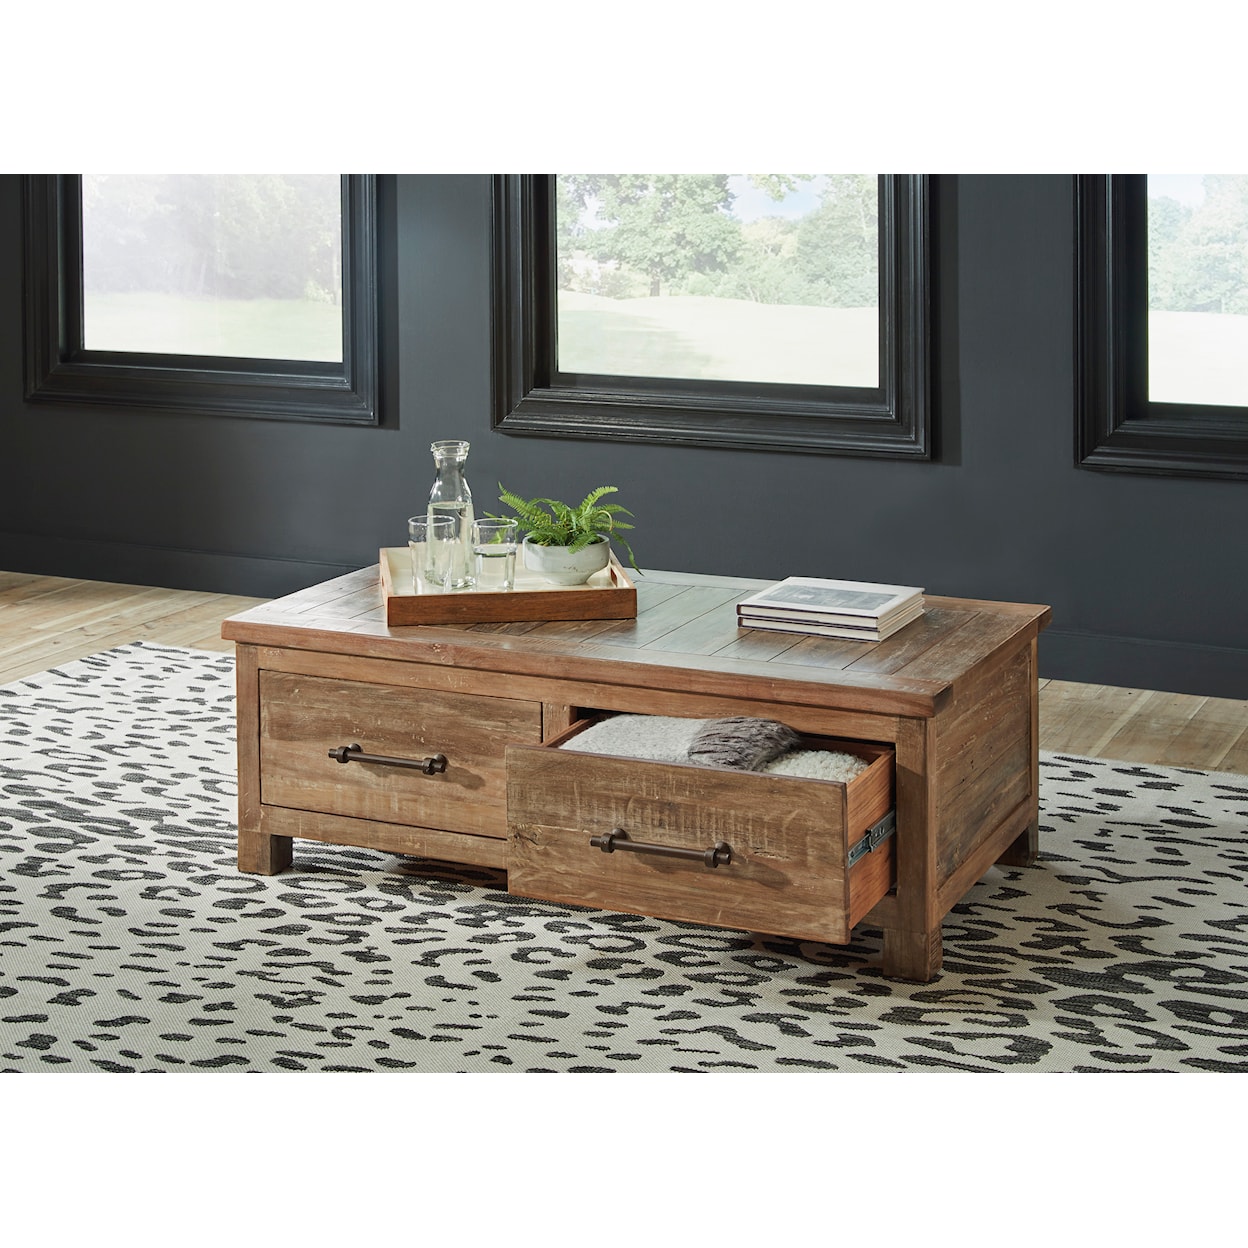 Benchcraft Randale Coffee Table